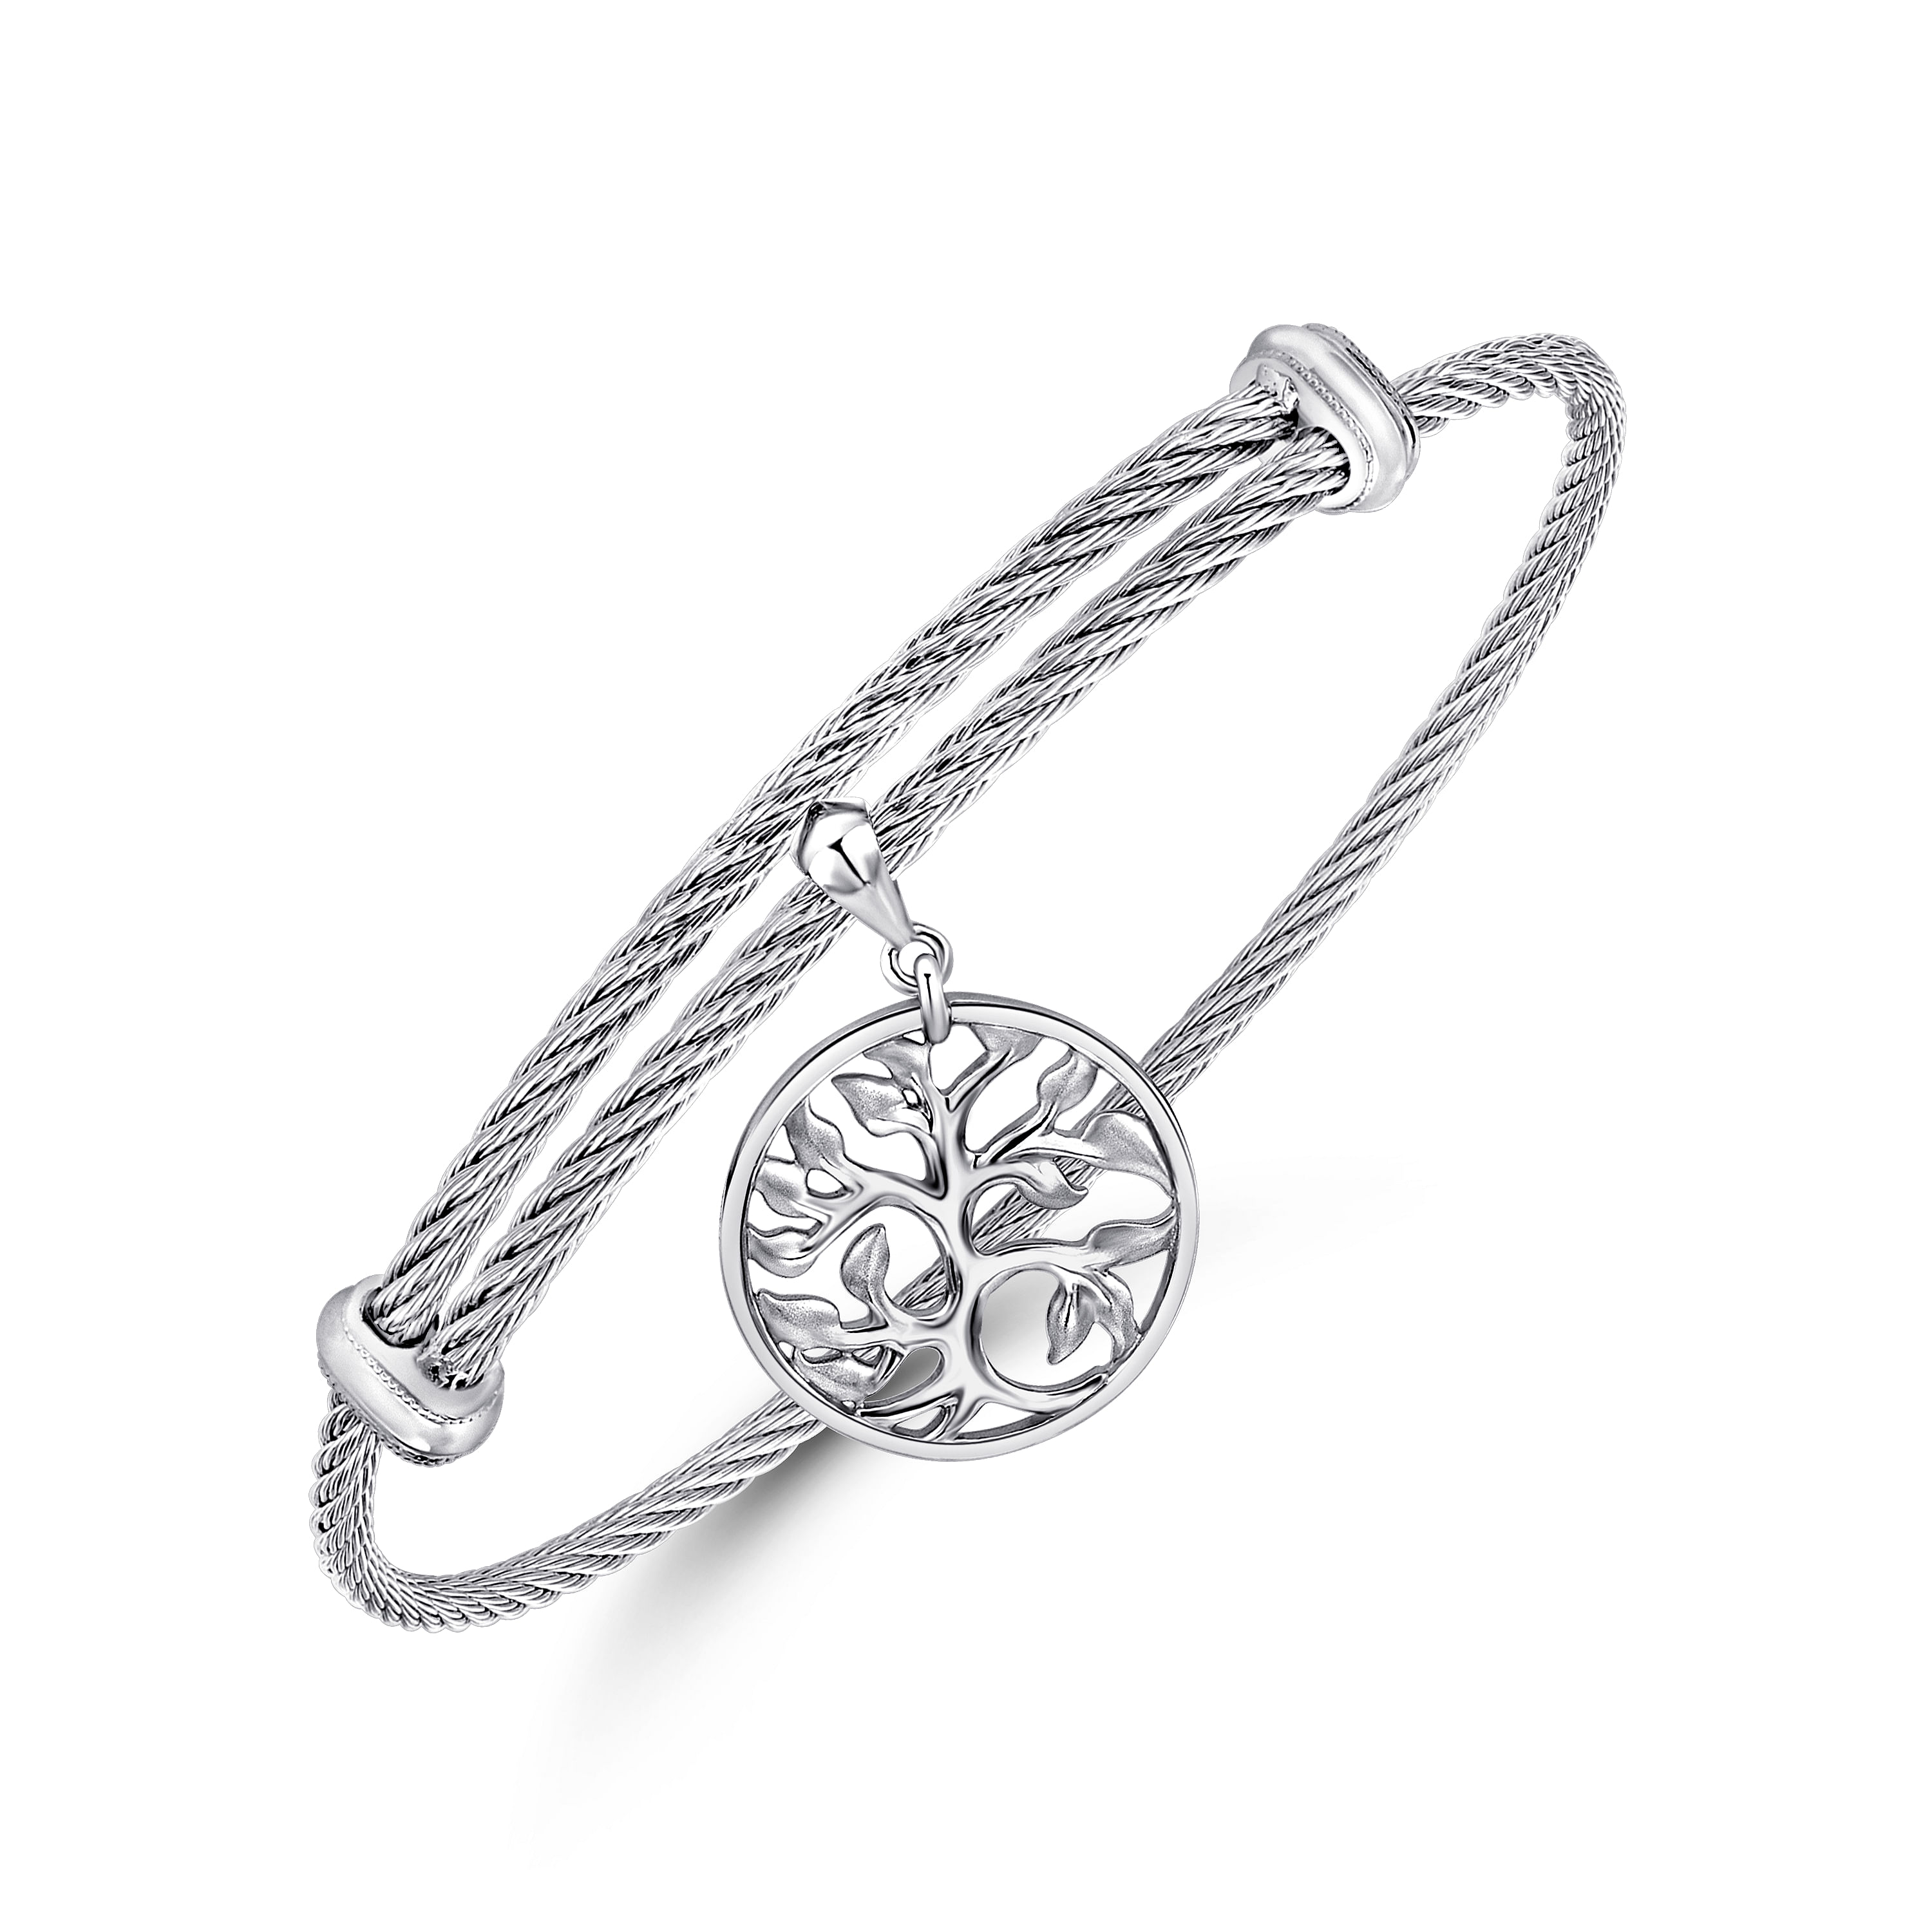 Adjustable Twisted Cable Stainless Steel Bangle with Sterling Silver Tree of Life Charm